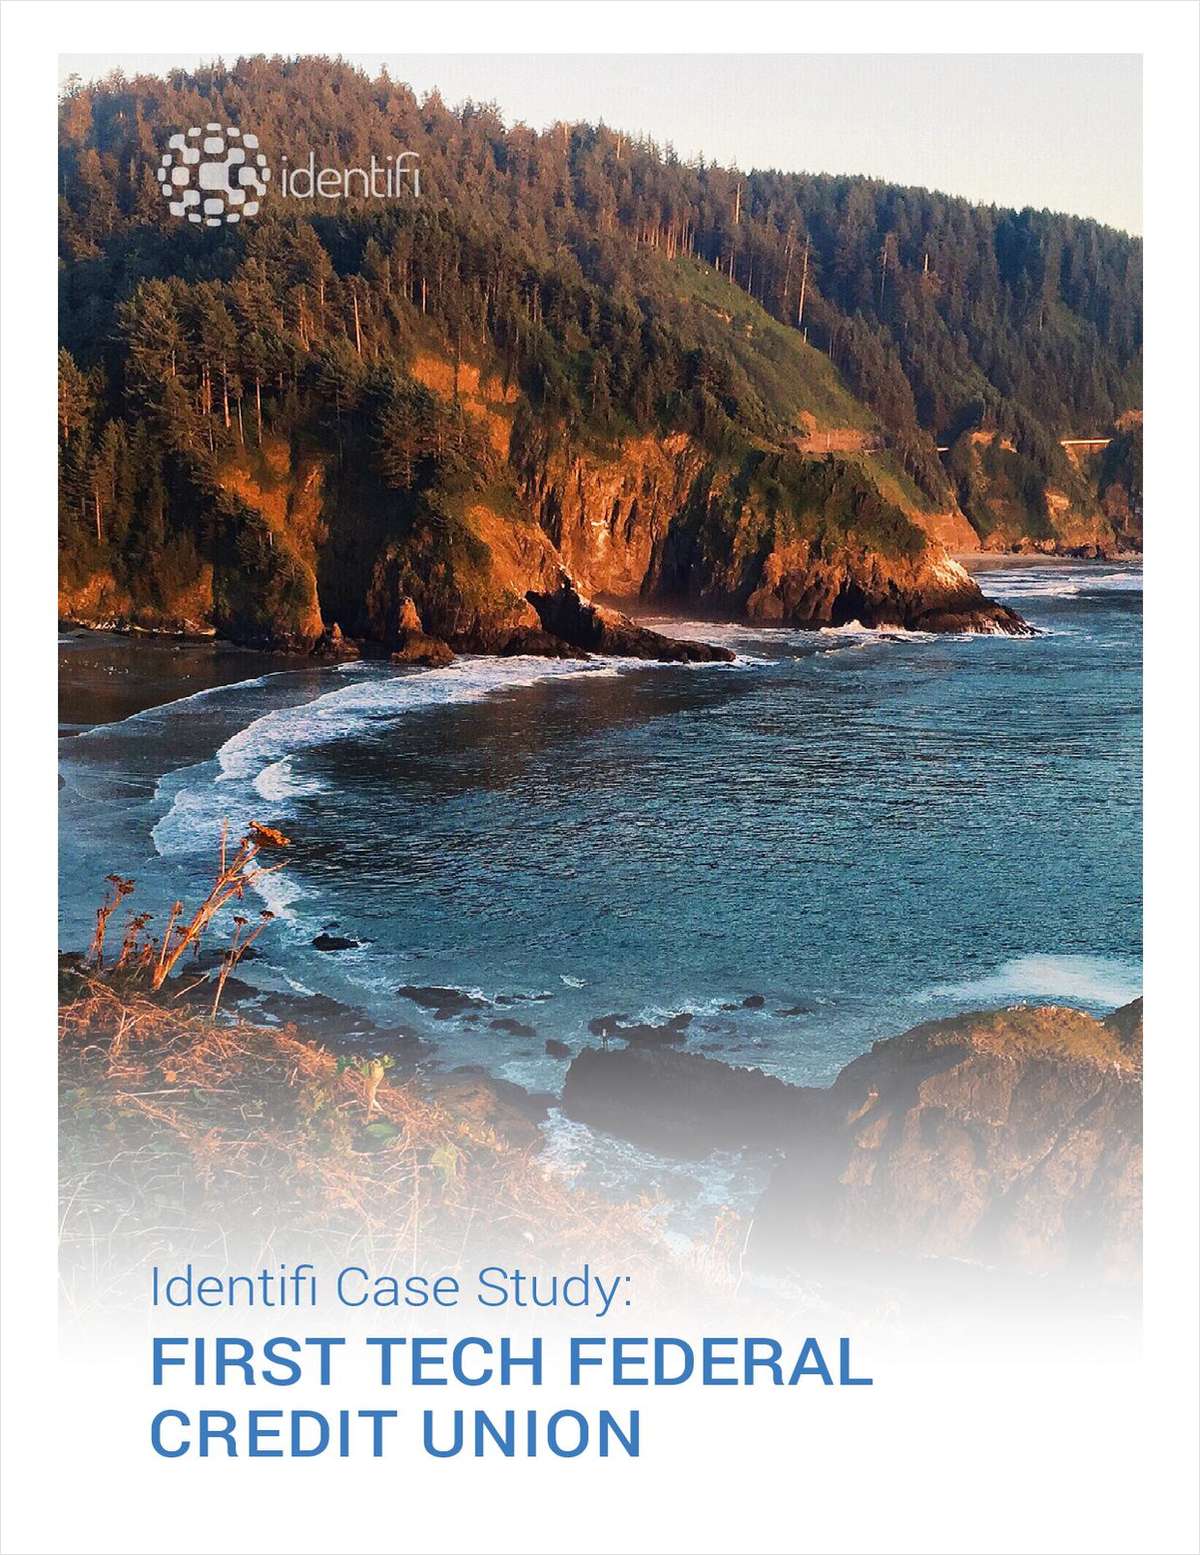 First Tech Federal Credit Union: A Distinctly Different Financial Institution